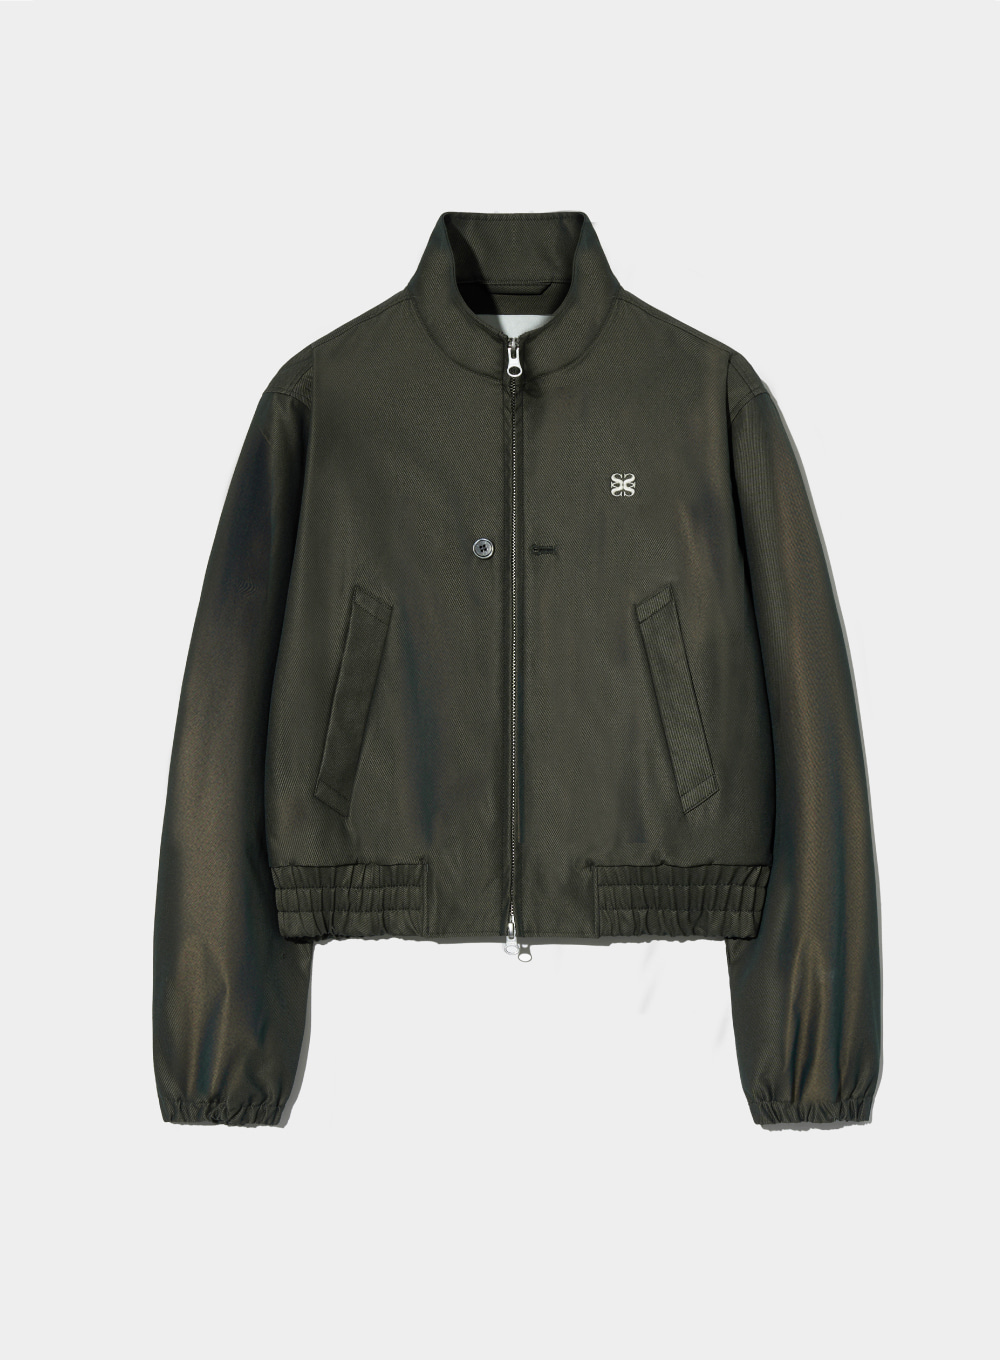 (W) Lecce Two Tone Zip Up Jacket - Glitter Green Brown